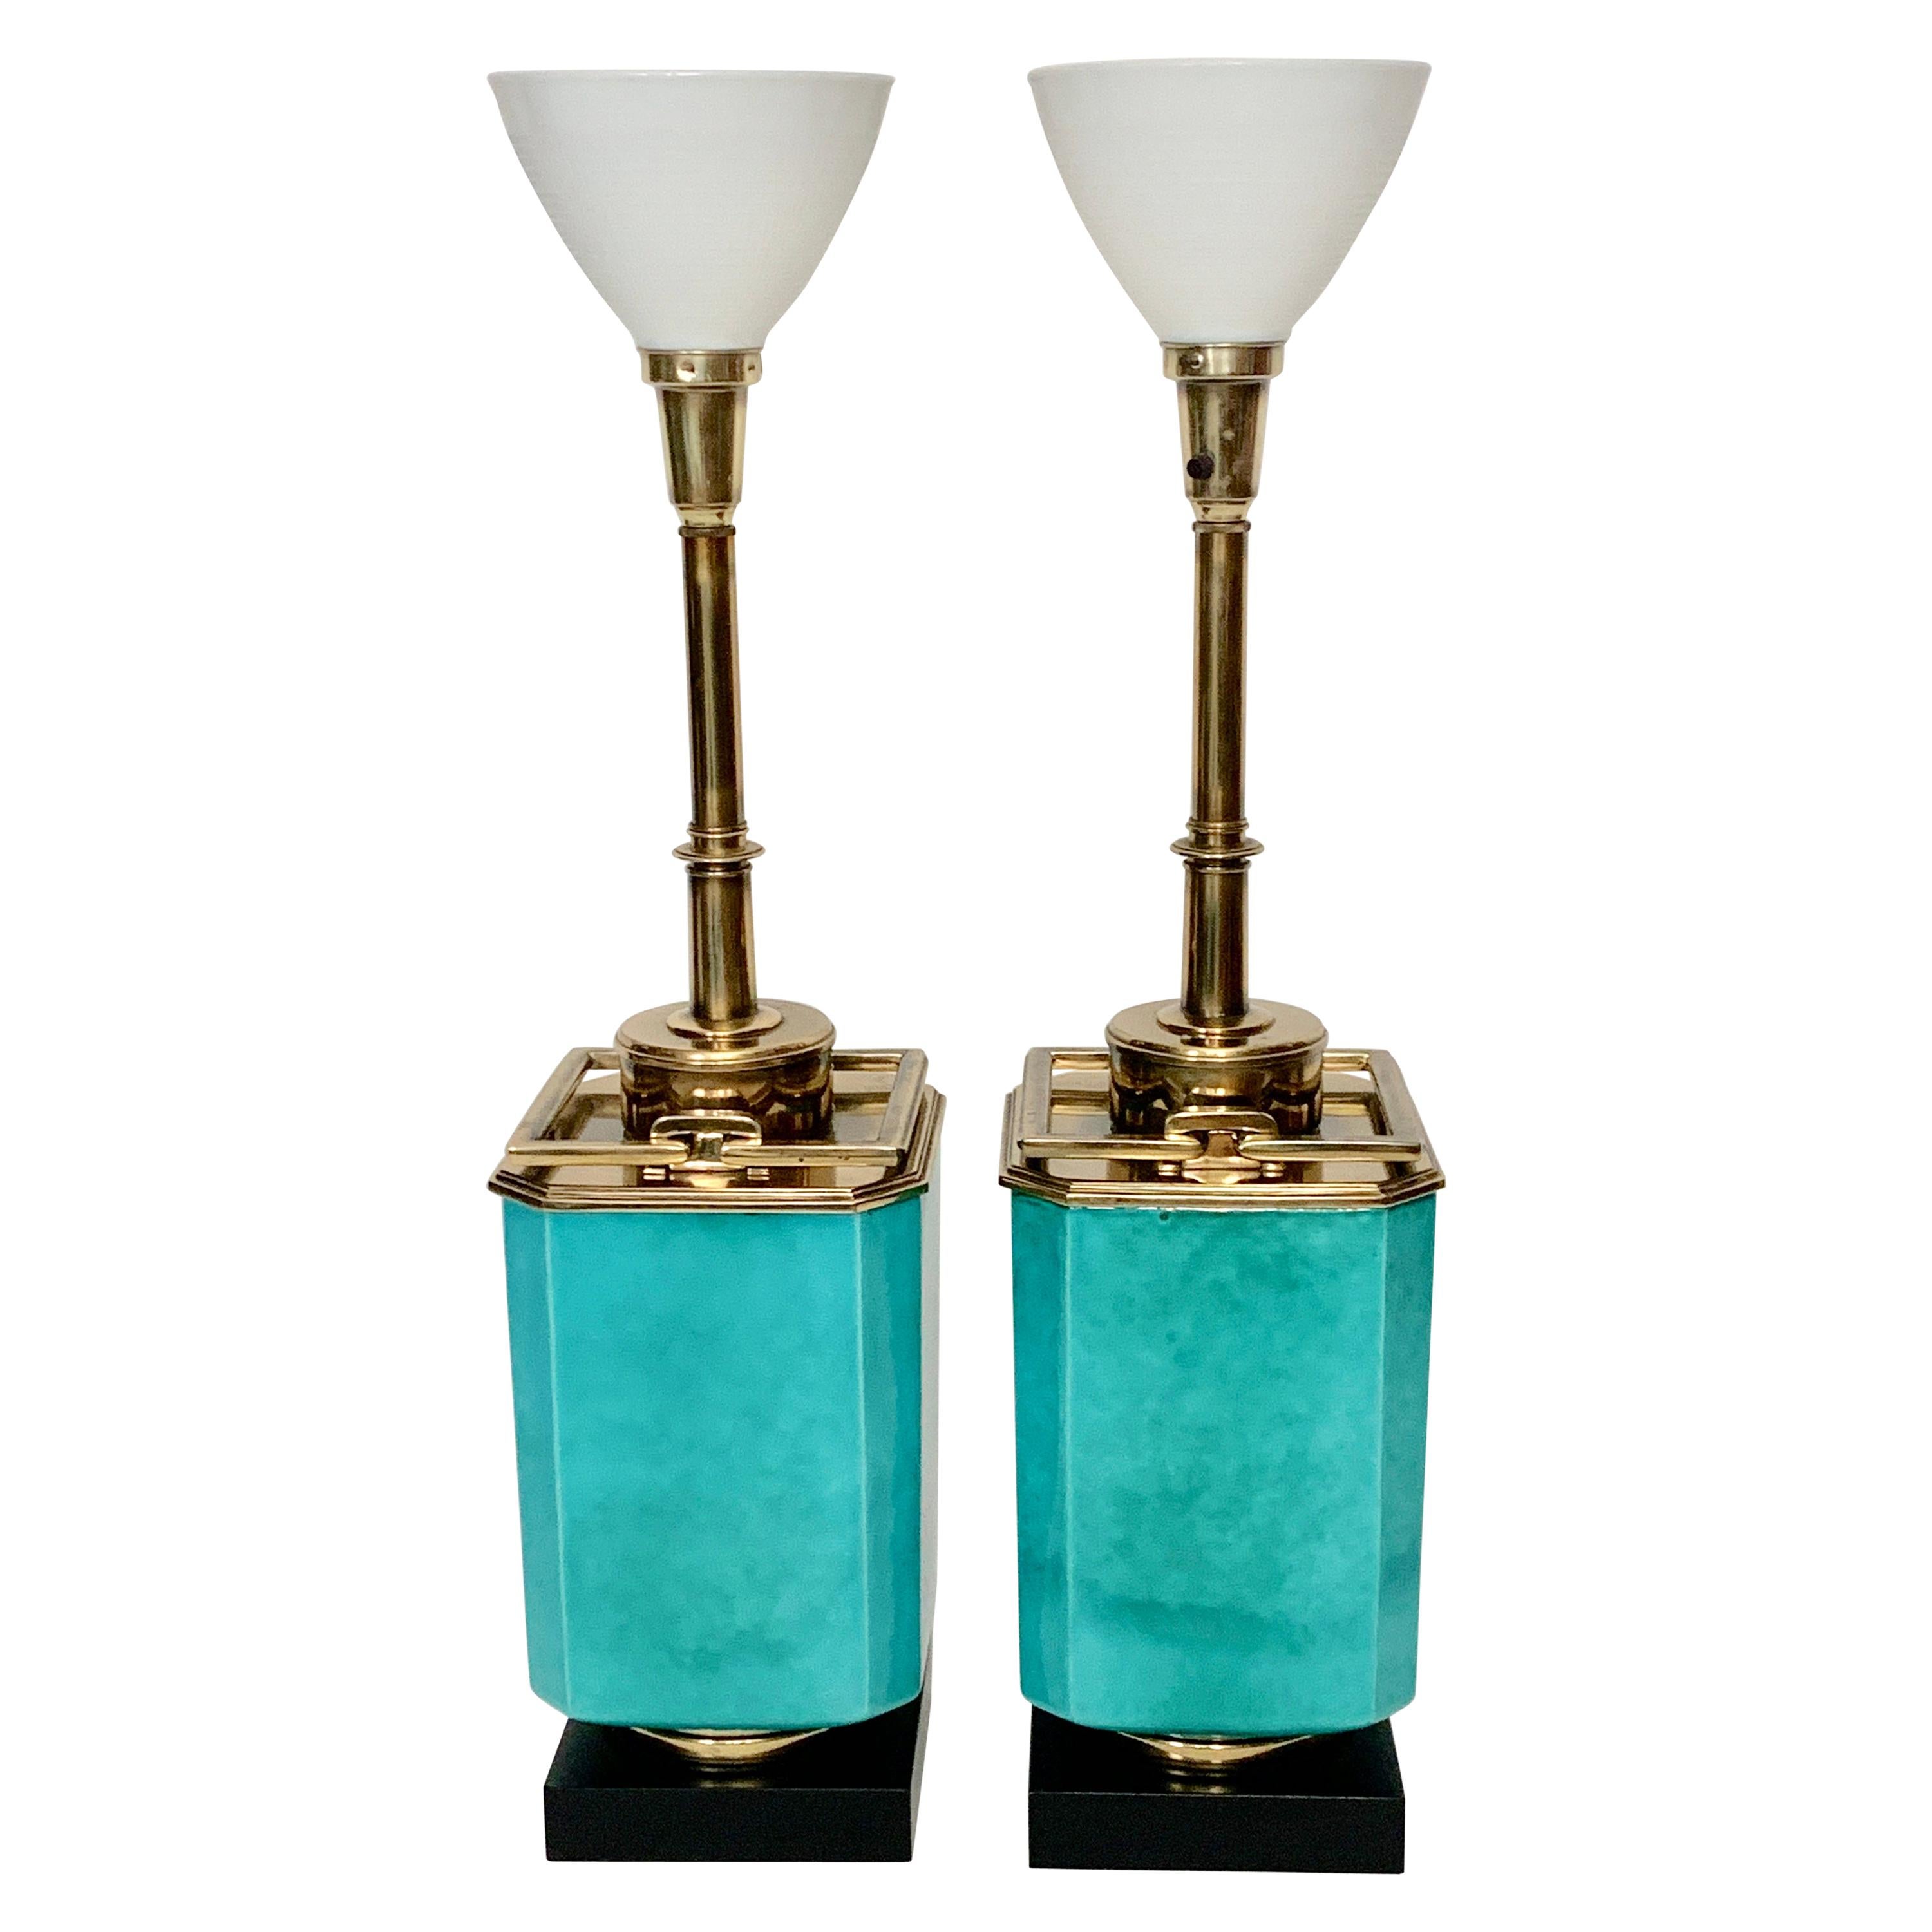 Pair of Edwin Cole for Stiffel Aqua Ceramic & Brass Table Lamp with Glass Shades